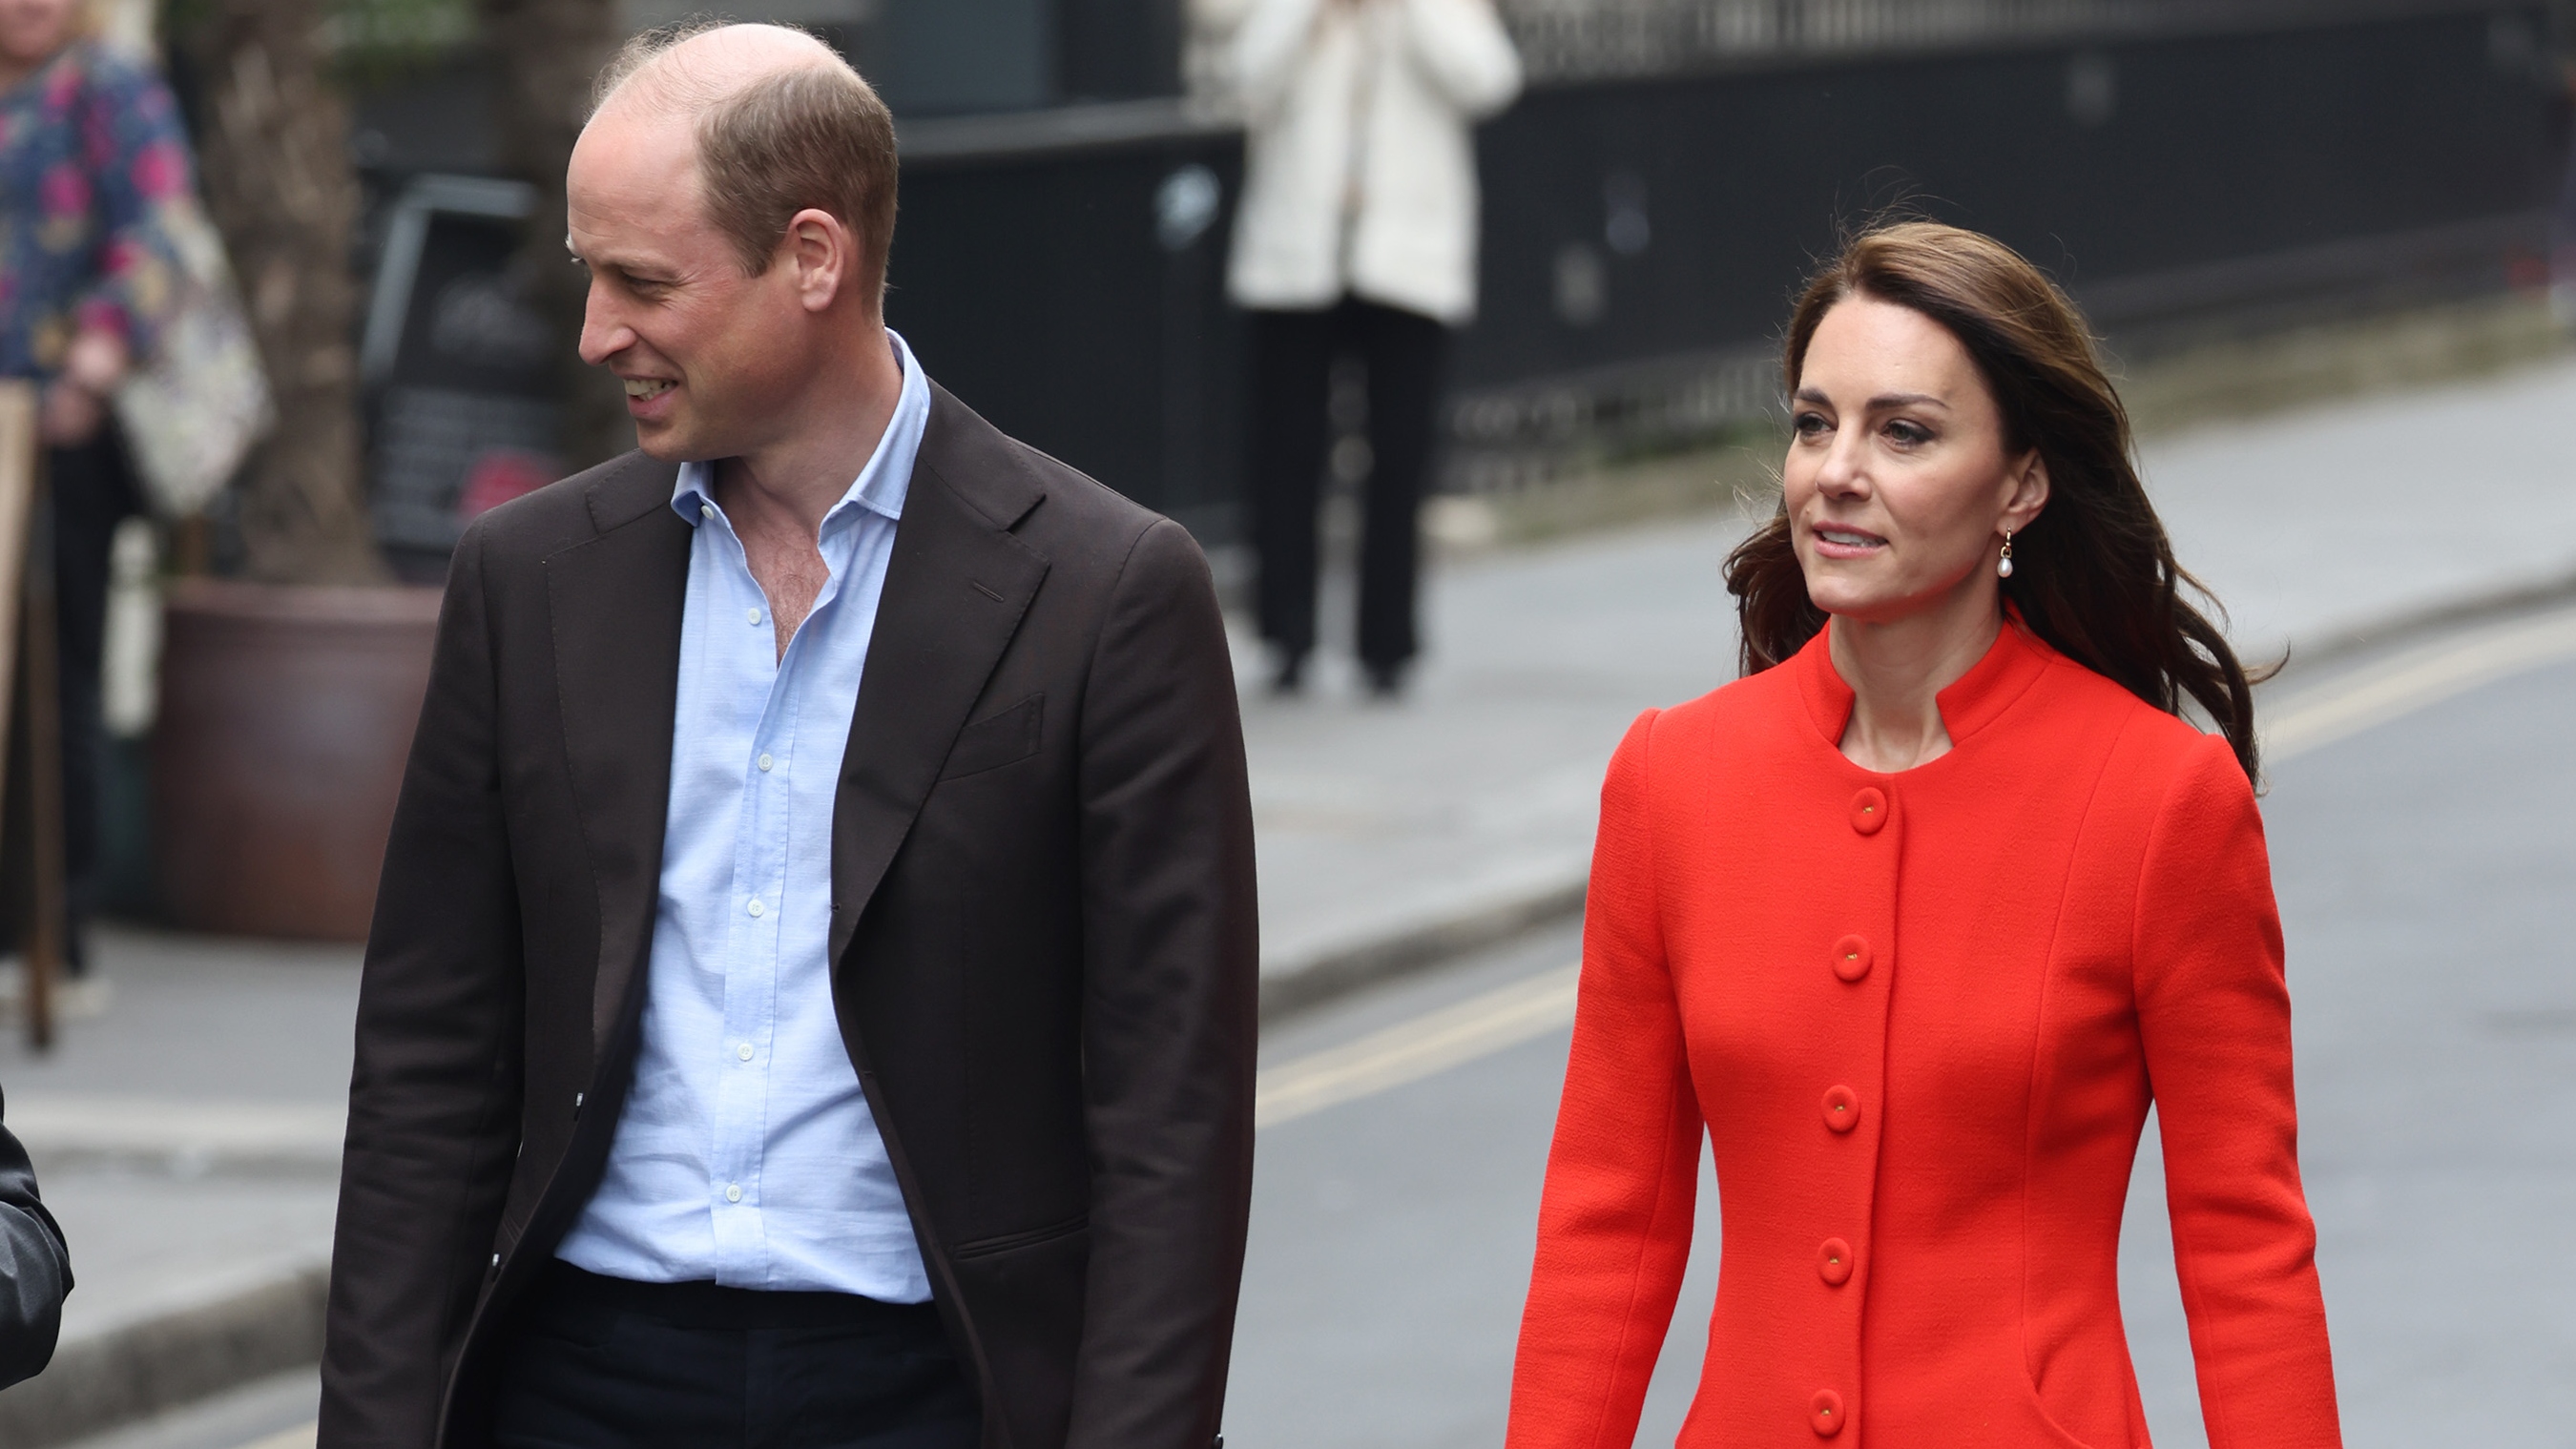 Prince William, Prince of Wales and Catherine, Princess of Wales arrive at the Dog & Duck pub